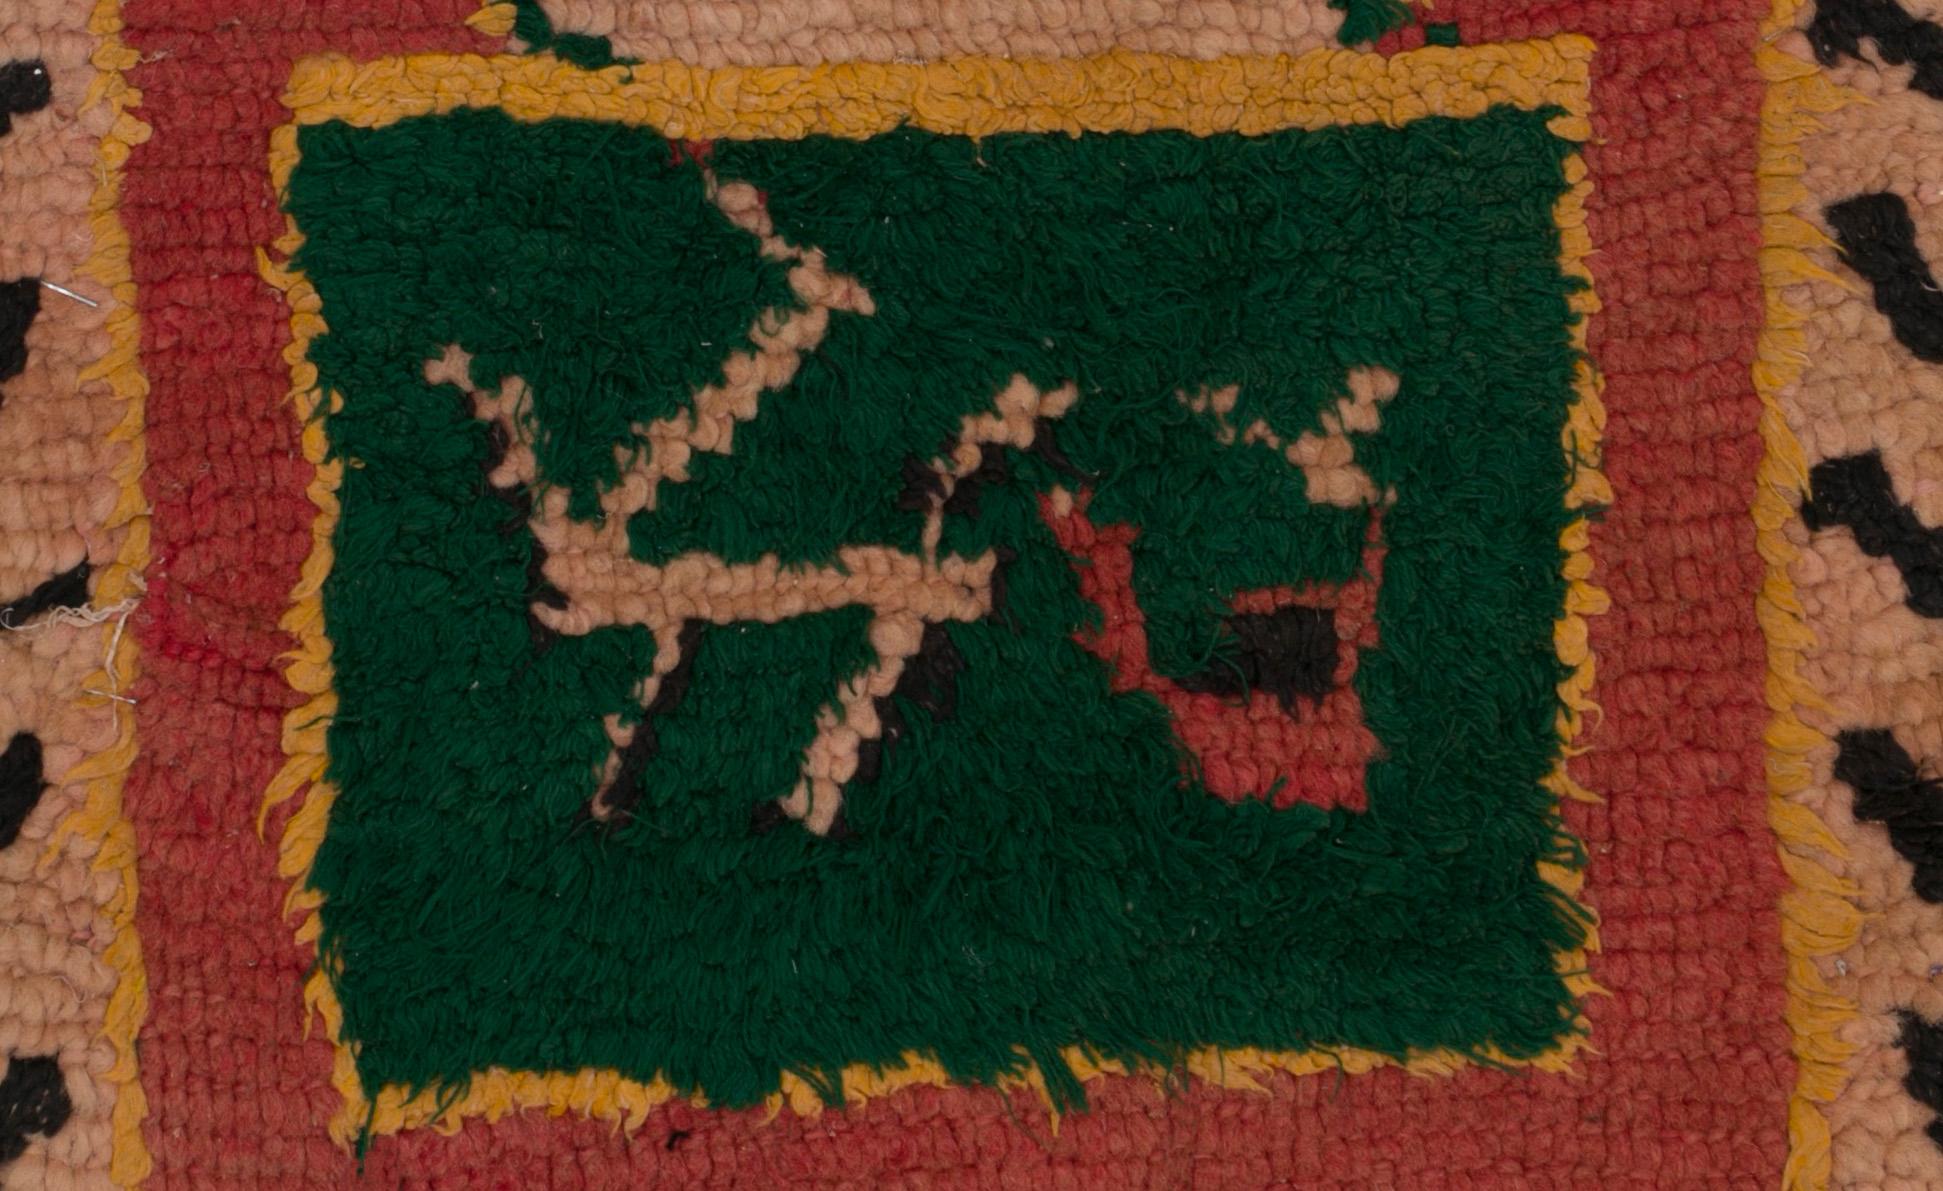 Typical design and experience for this vintage tapestry was by Berber women from the Atlas Mountains.
Made from woolen ends and other threads, embroidered on wasted plastic bags of cereals, this unique and vintage work is the demonstration of the